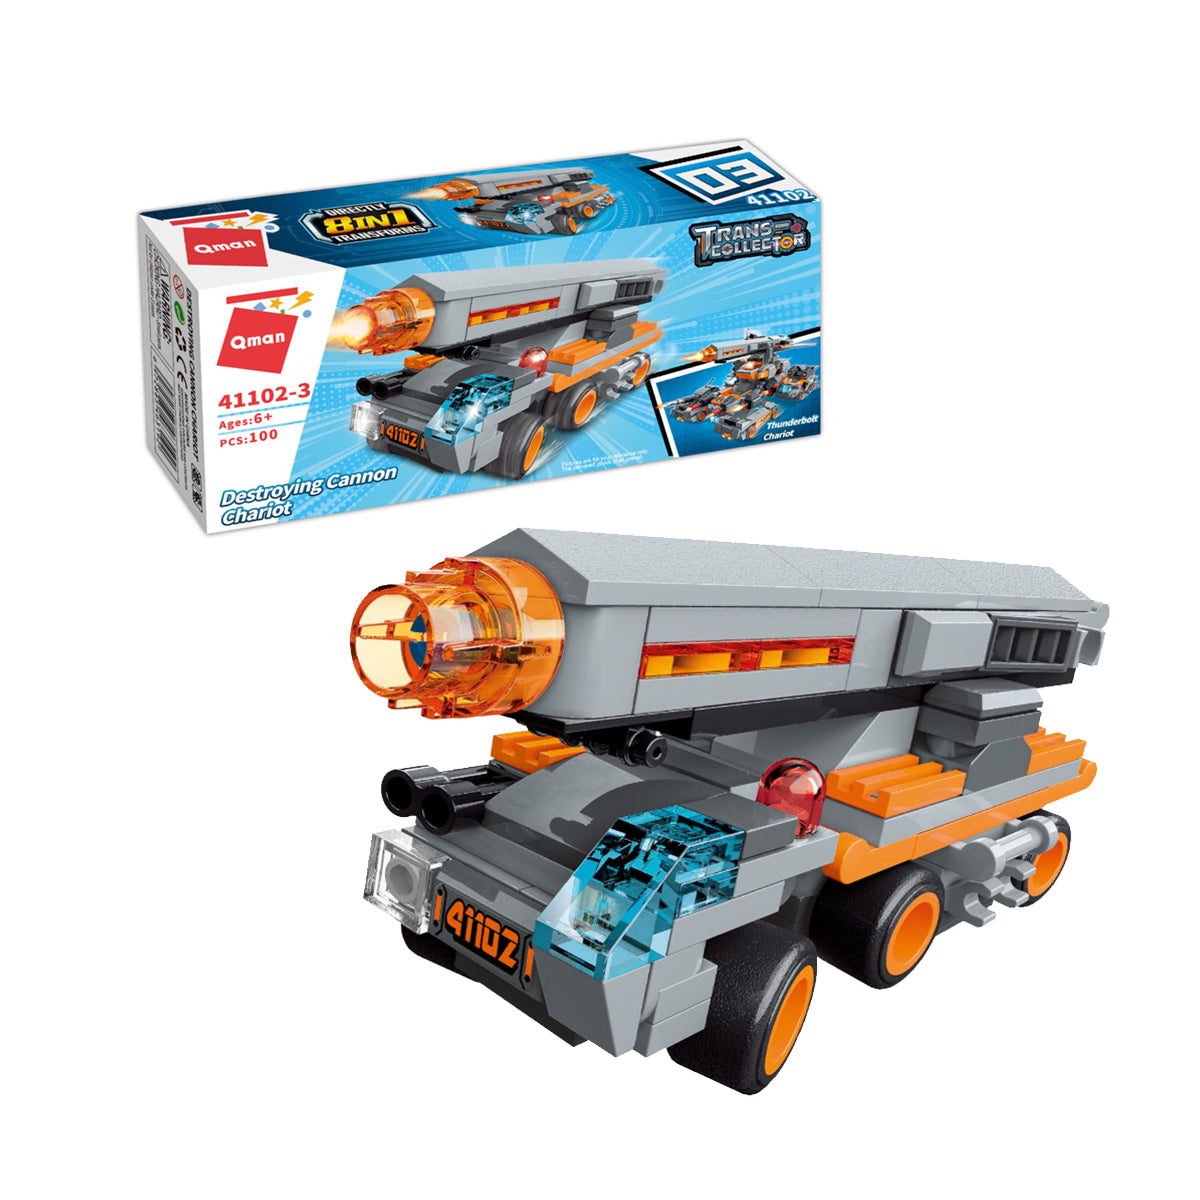 Qman Trans-Collector Thunderbolt Chariot 8 in 1: Destroying Canon Chariot (7681412858080)